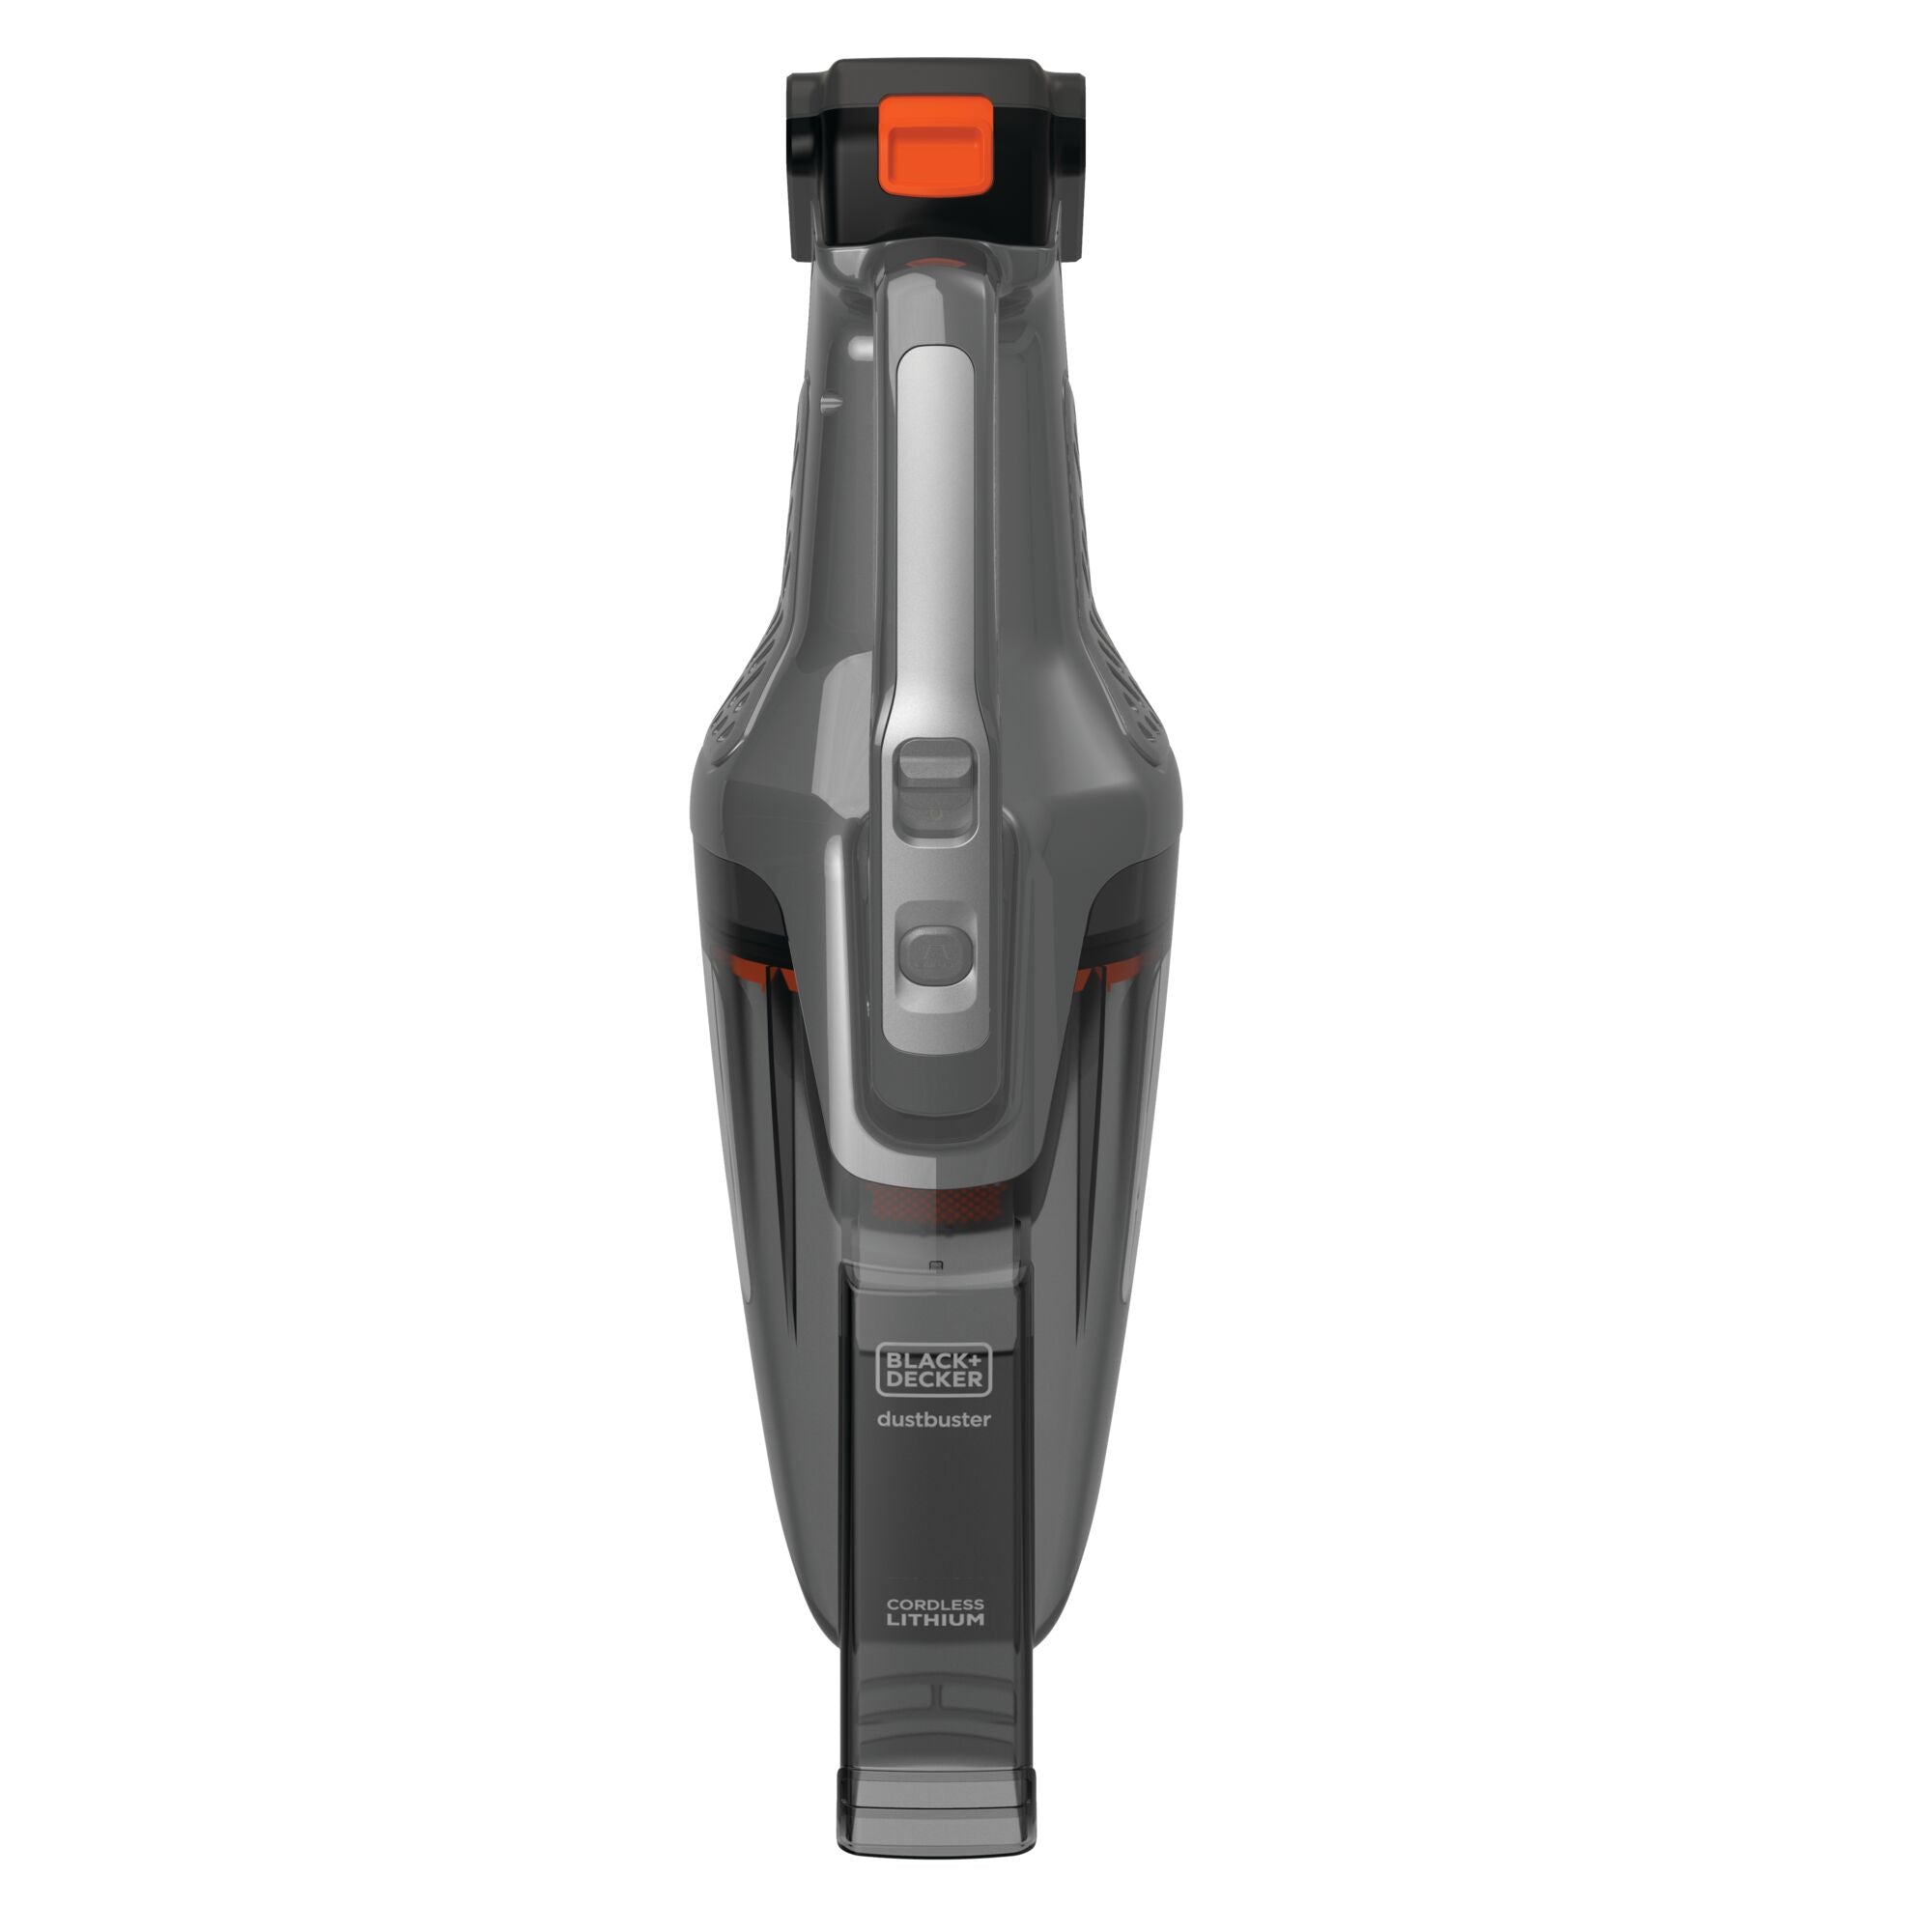 BLACK+DECKER dustbuster® POWERCONNECT™ 20V MAX* Cordless Handheld Vacuum is sucking dirt from grey carpet.